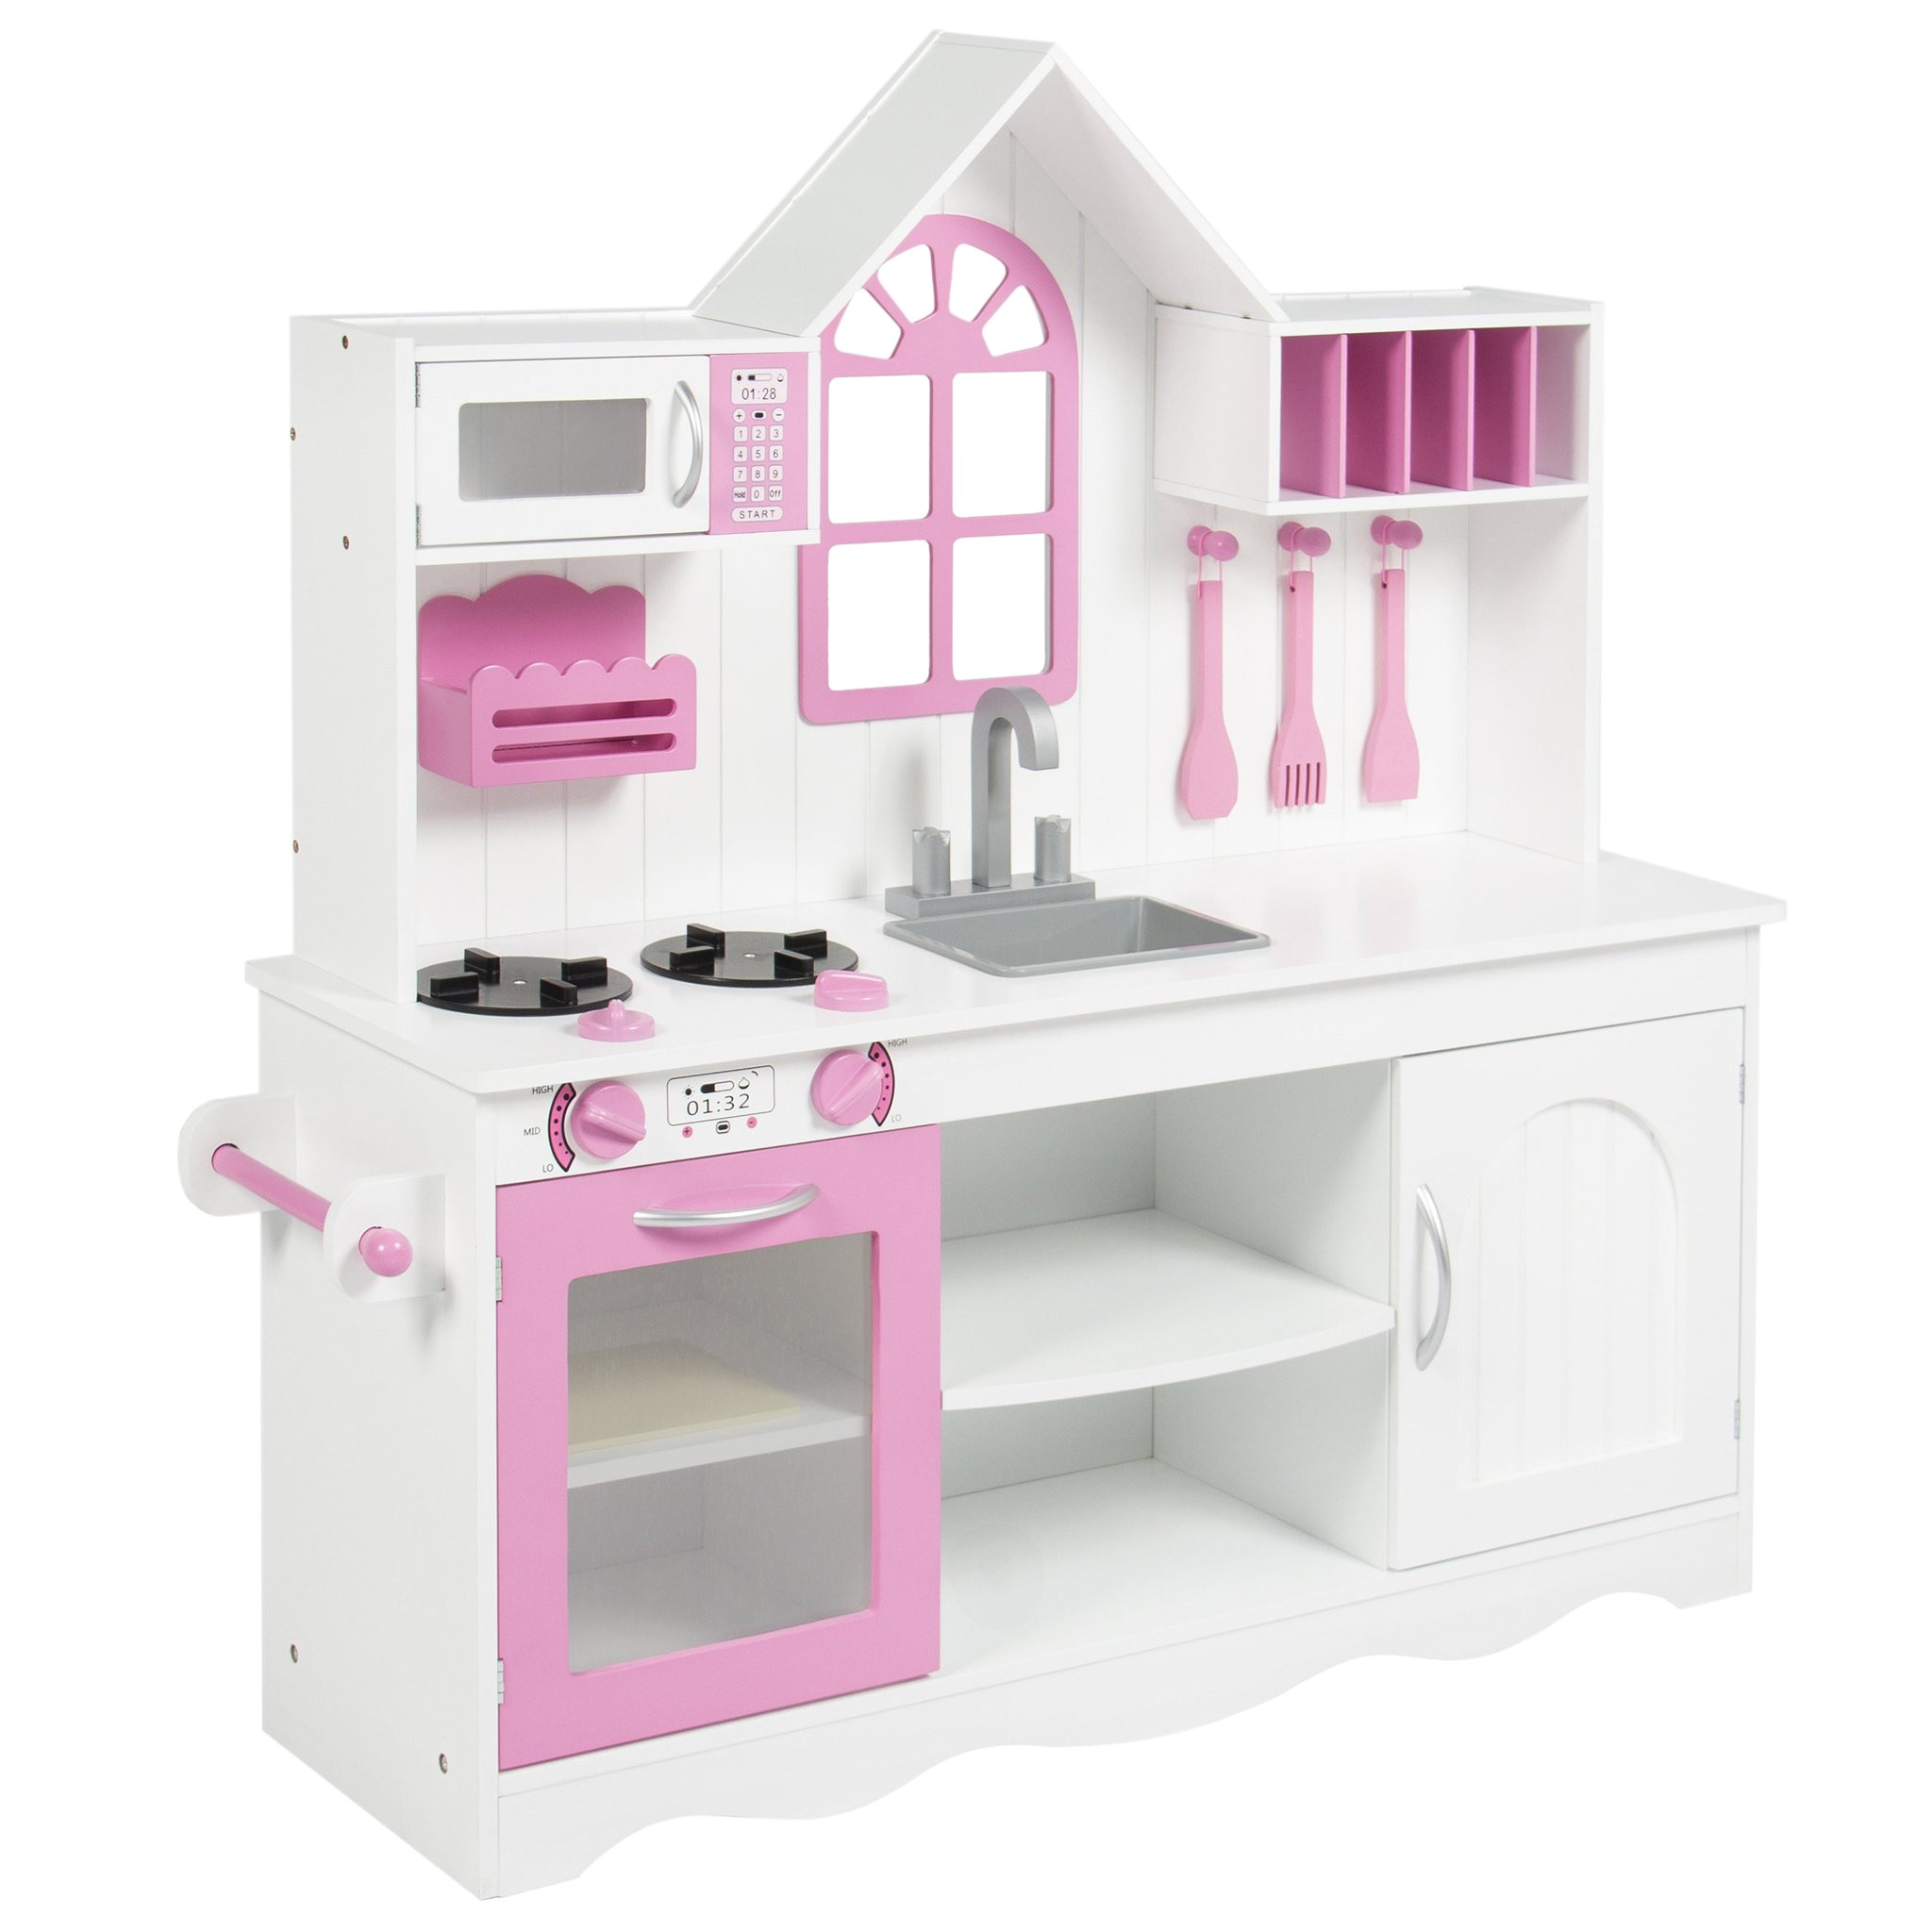 charming imaginarium all in one wooden kitchen set and toy wood kitchen